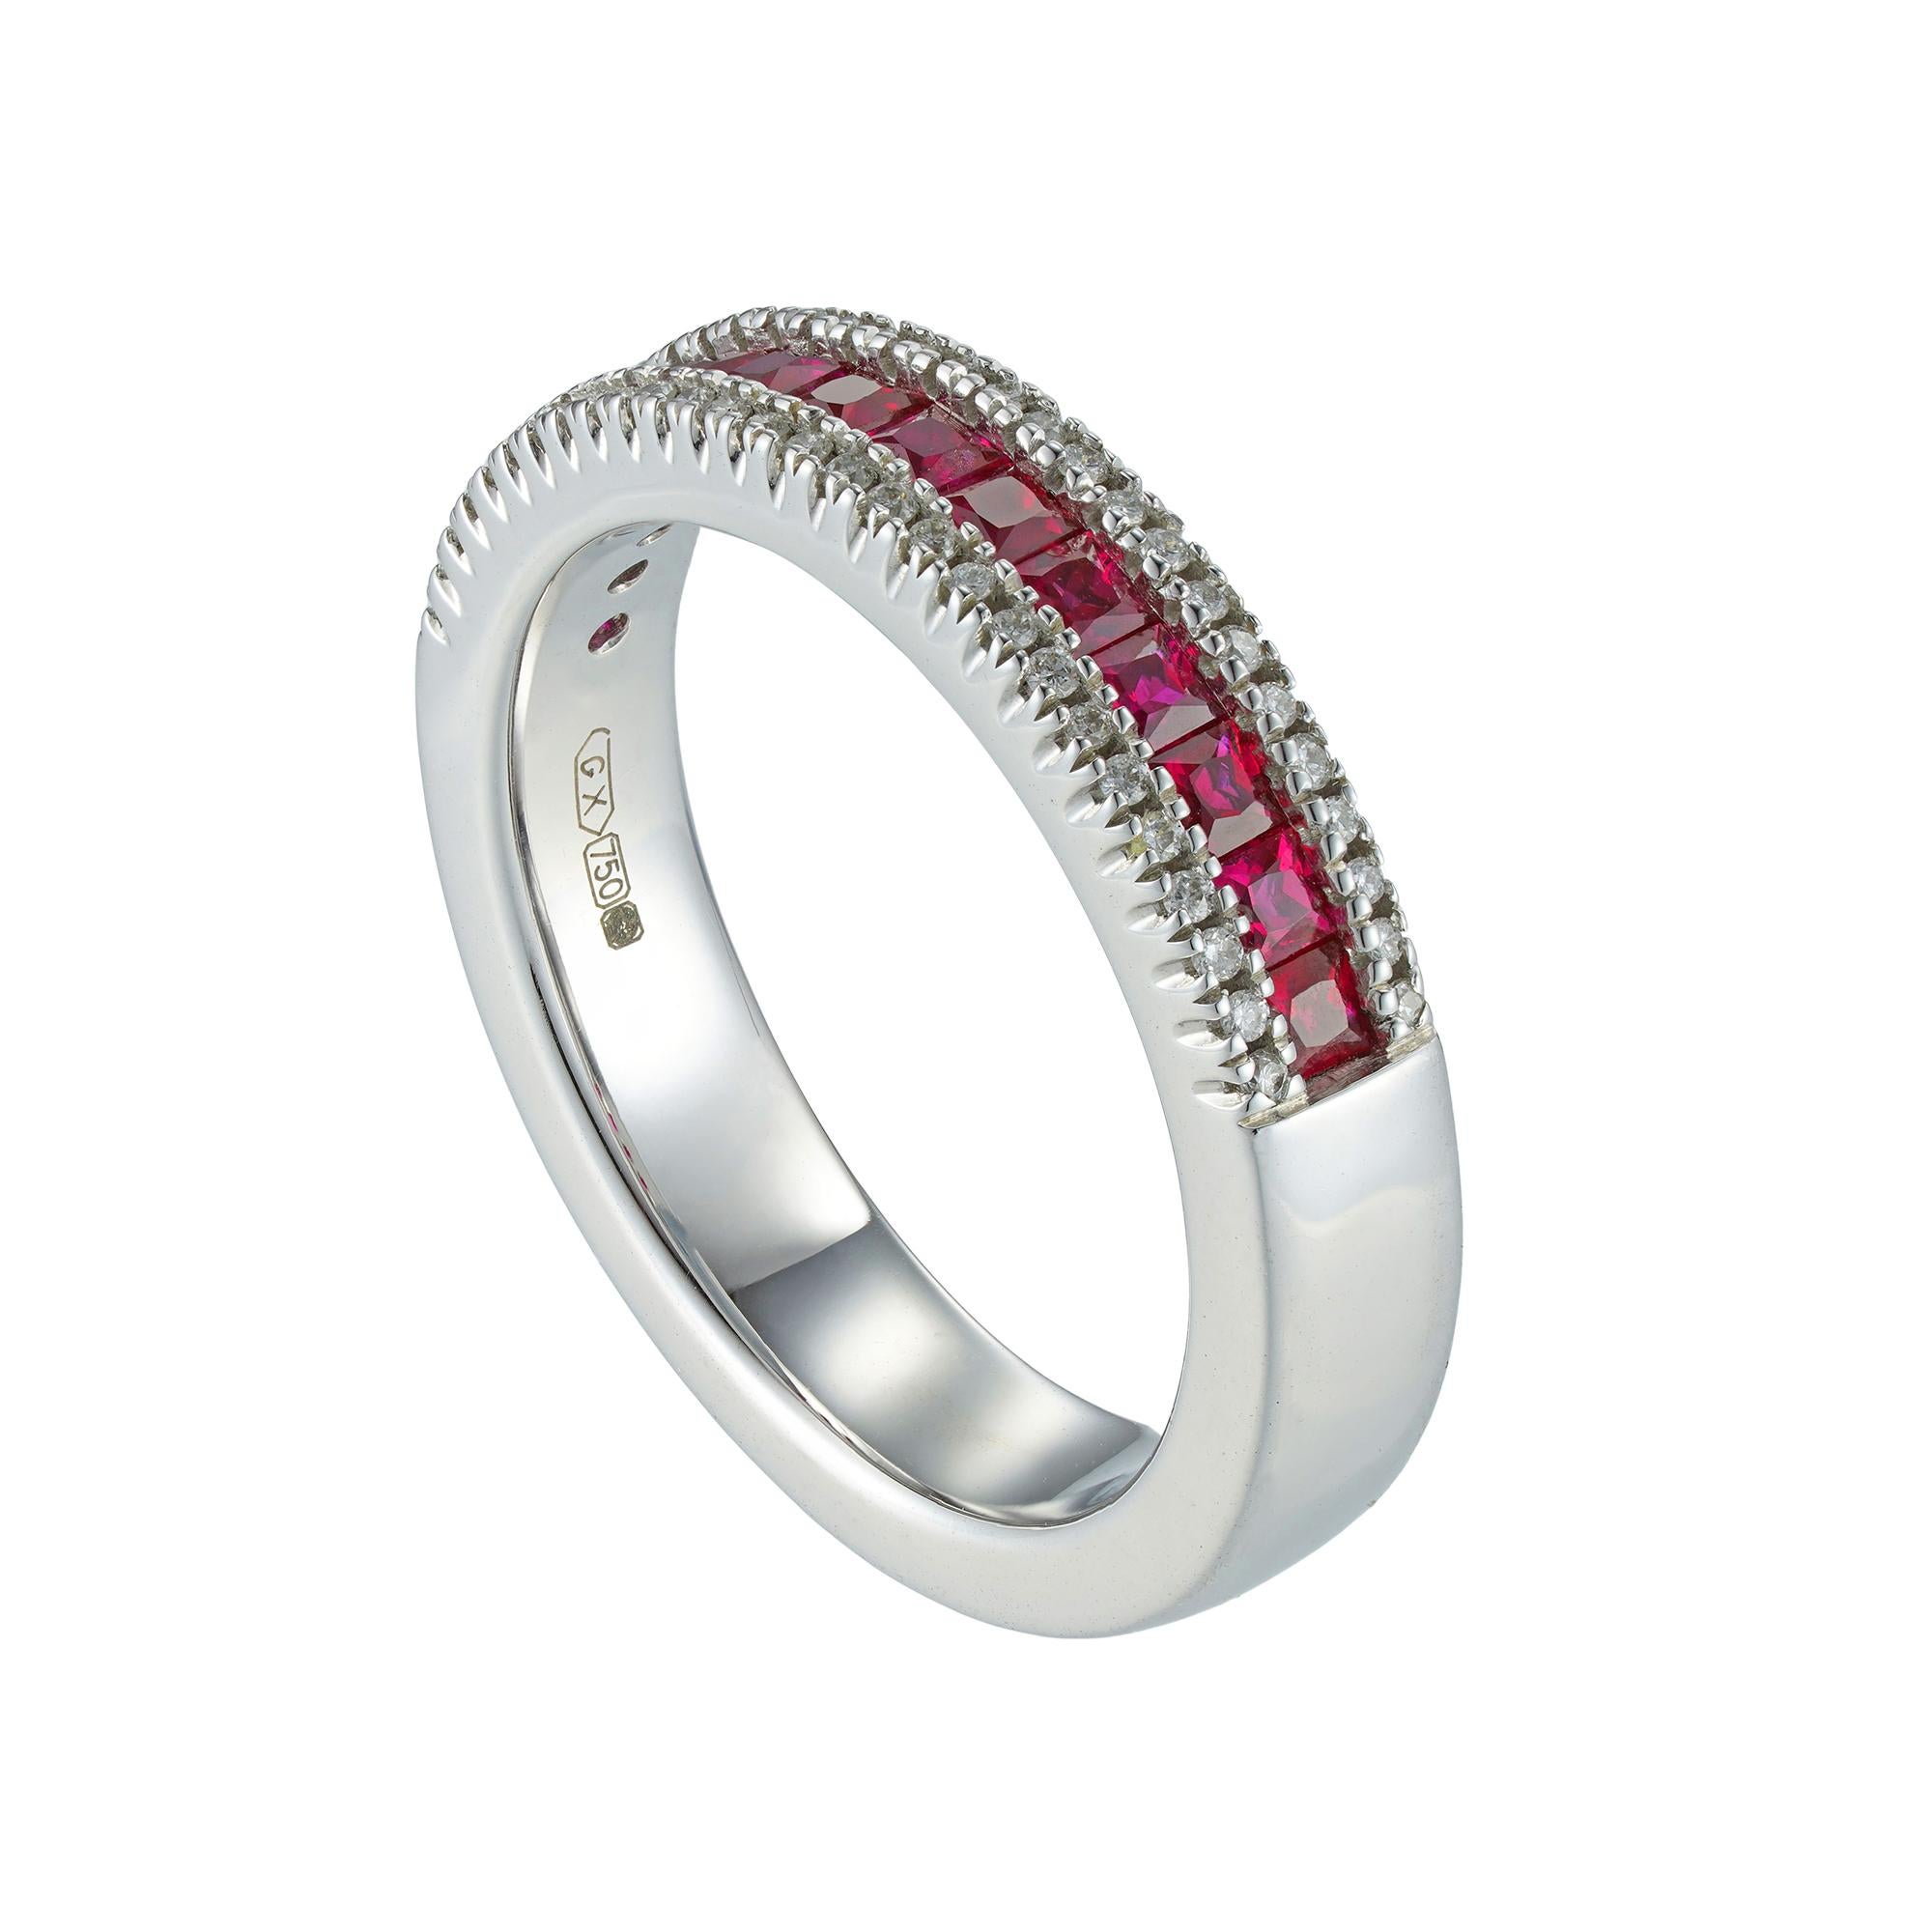 A ruby and diamond-set ring, the central row with fourteen princess-cut rubies weighing 0.72 carats in total, set between two rows or round brilliant-cut diamonds, weighing 0.16 carats in total, all mounted in white gold, hallmarked 18ct Sheffield,